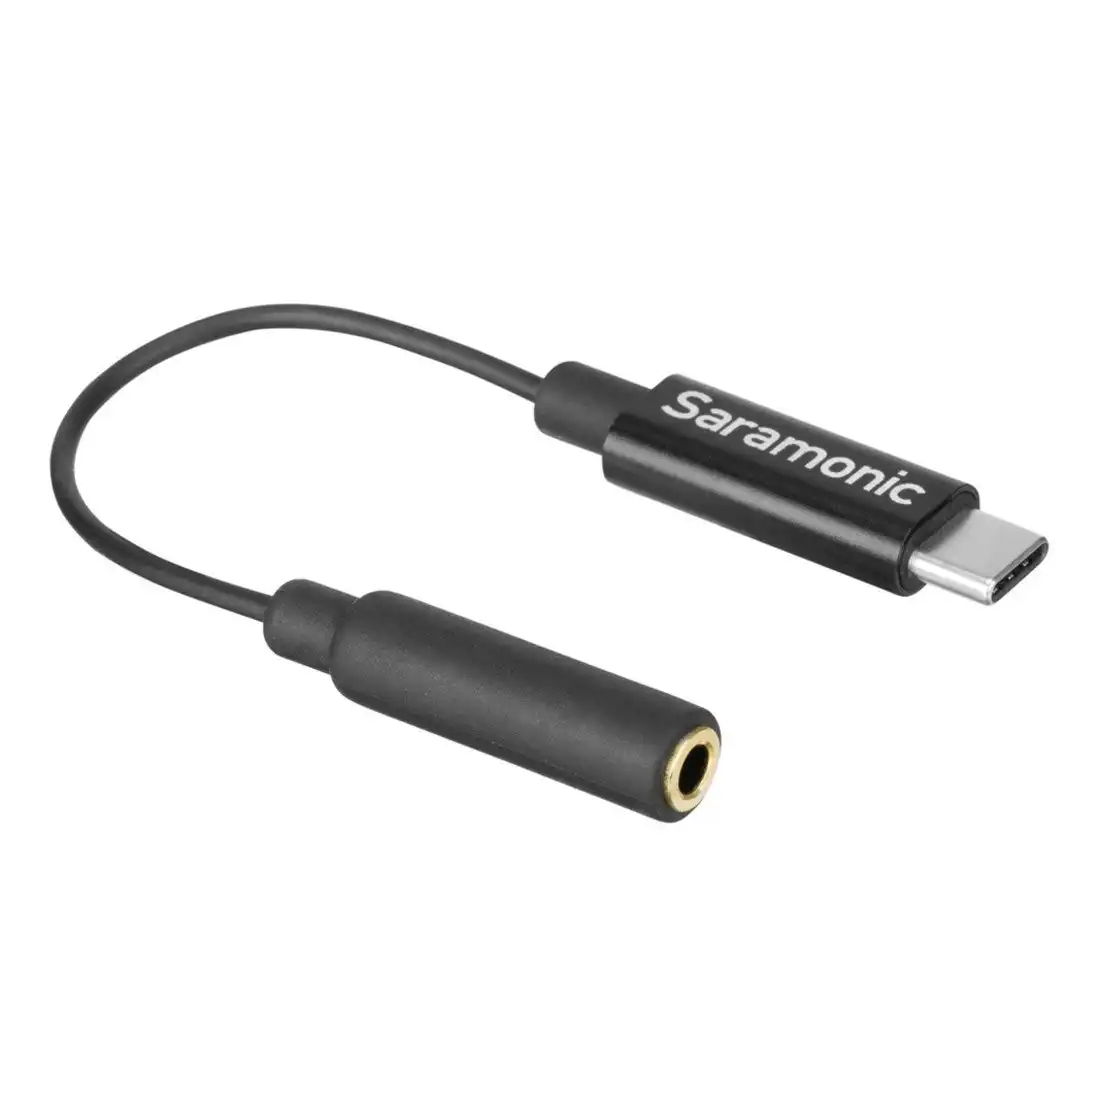 Saramonic SR-C2003 Short USB Type-C Male to Gold-Plated Female 3.5mm TRS Adapter Cable